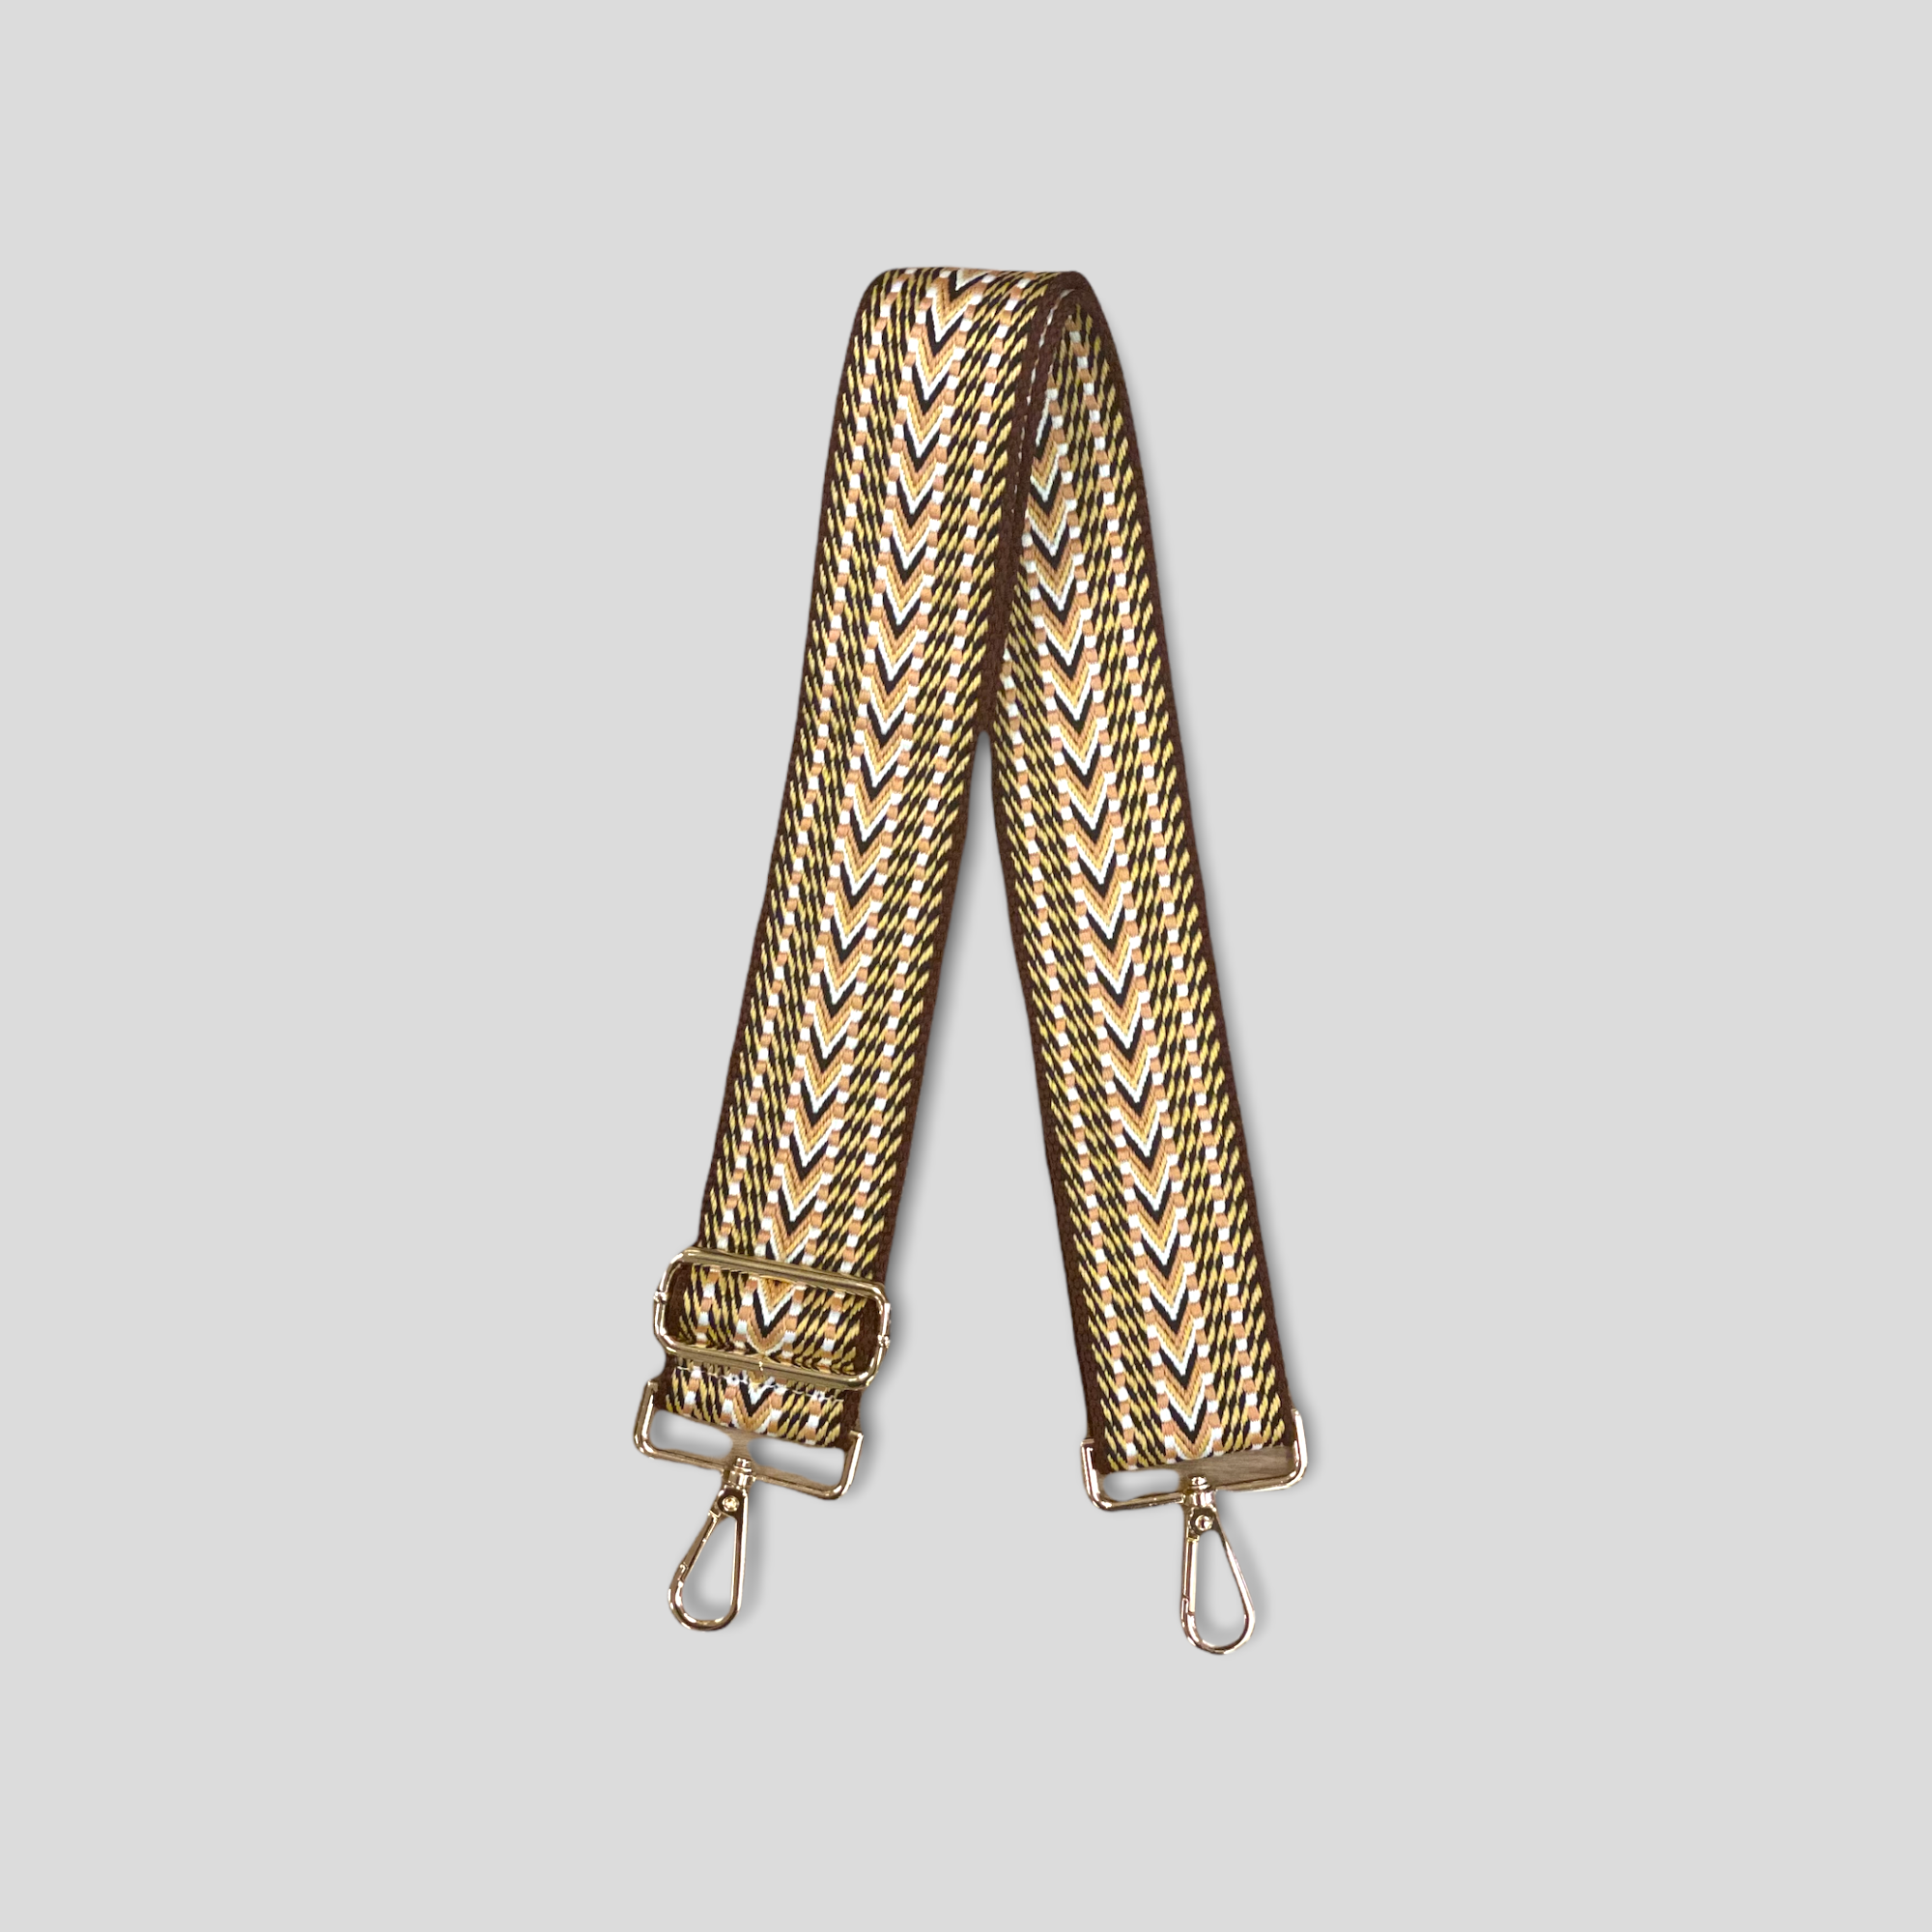 Ahdorned Woven Embroidered Bag Strap - Brown/Peach/Yellow (Gold Hardwa